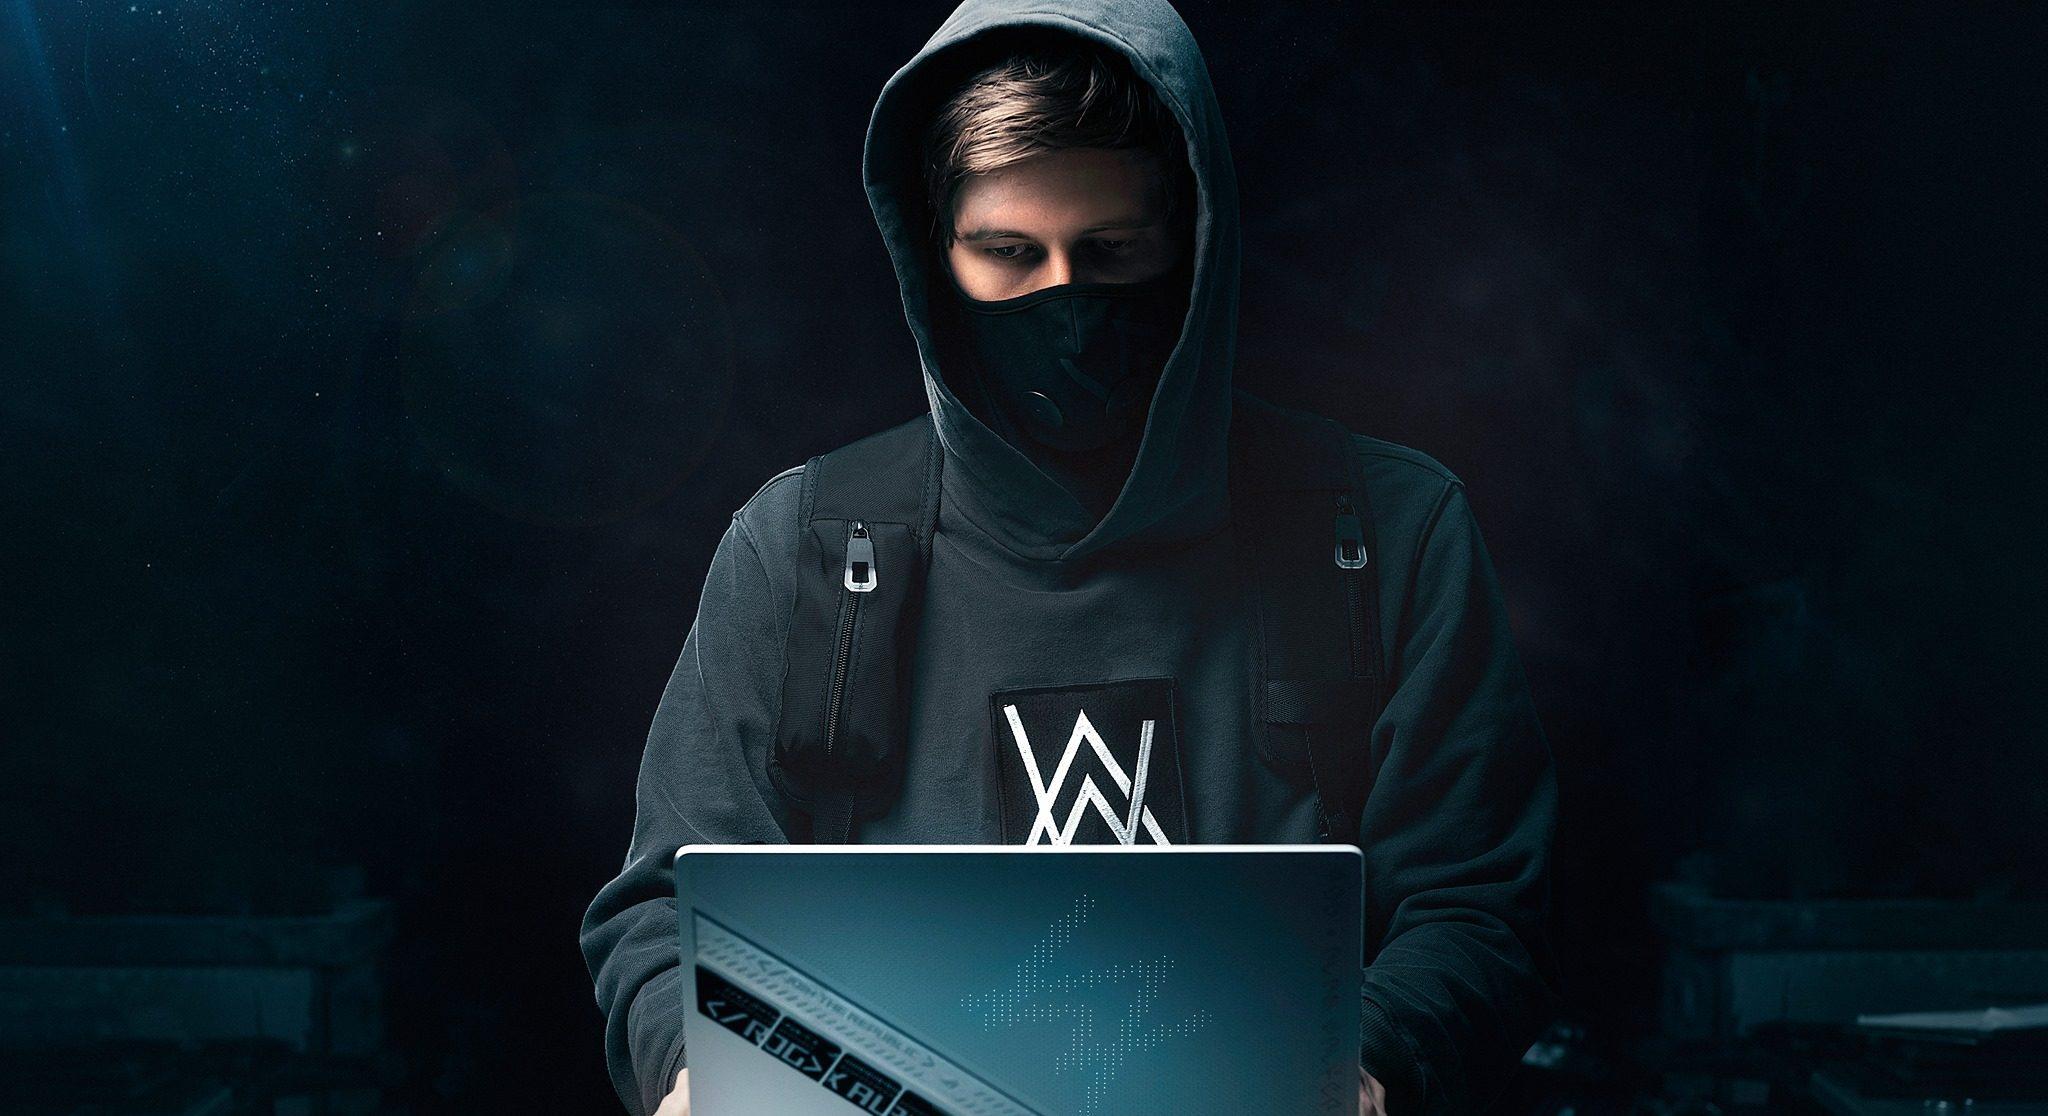 Alan Walker breakthrough hit 'Faded' turns 5 years old today